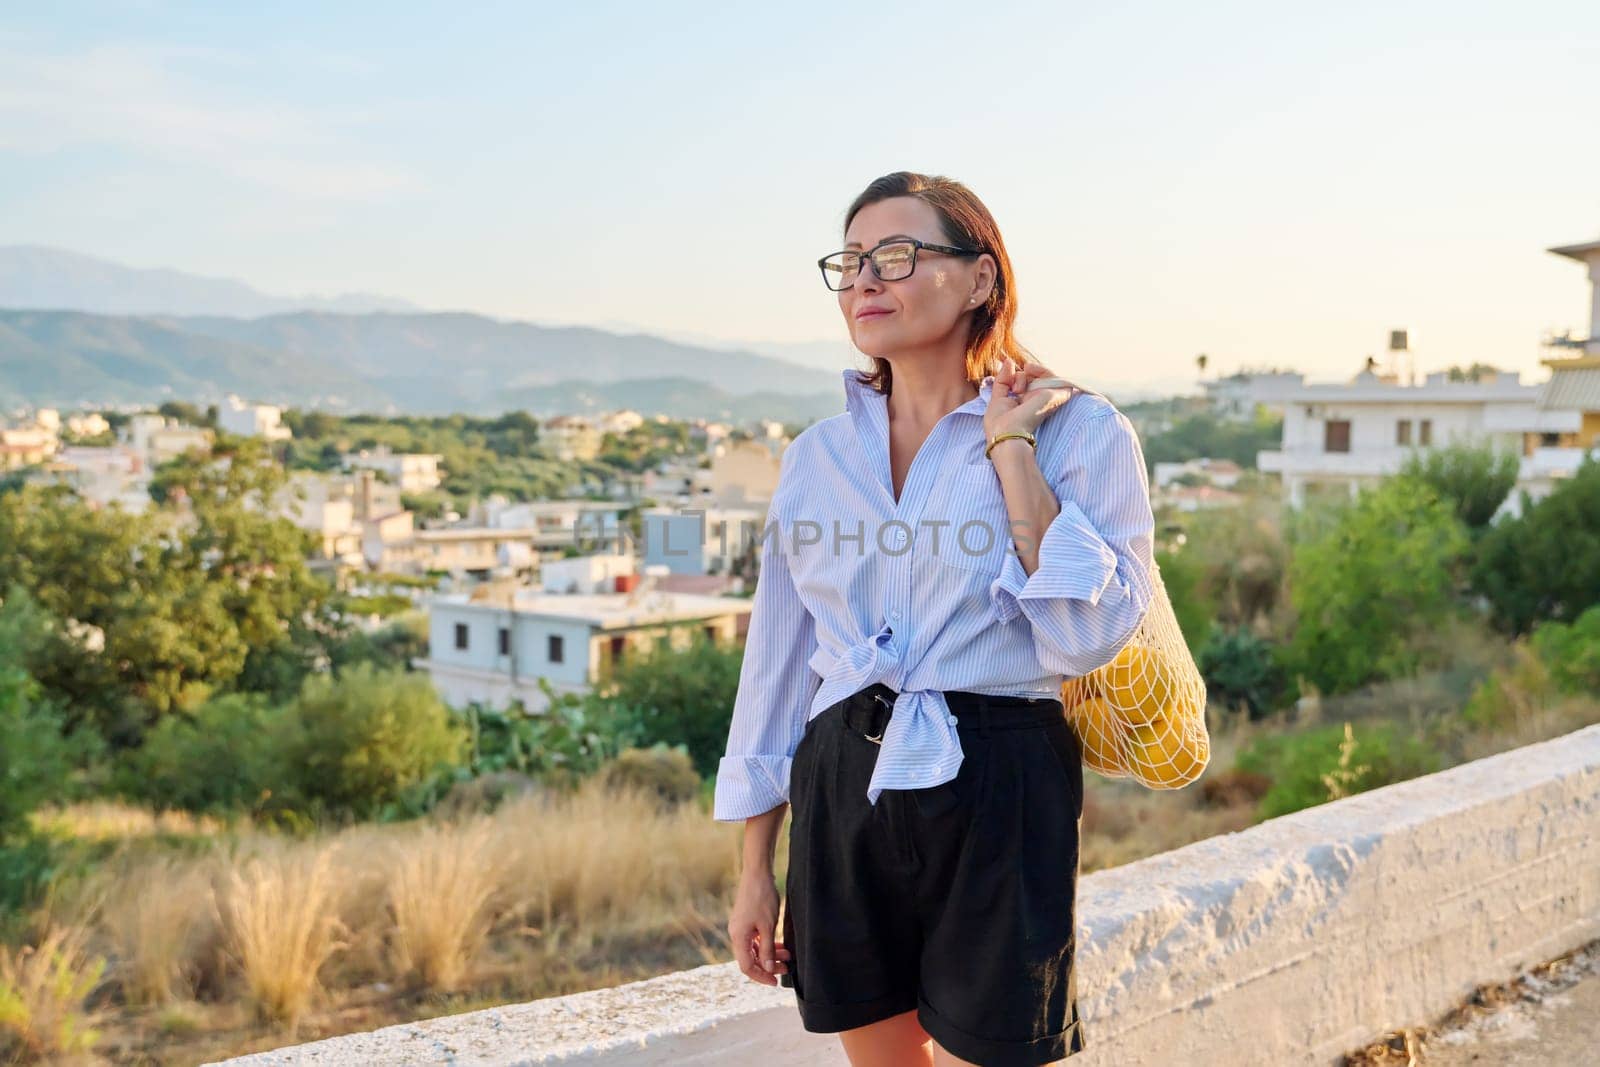 Eco tourism, woman walking relaxing in European mountain village, enjoying clean air, landscape, sunset, with a bag of fresh farm oranges. Nature, travel, ecology, lifestyle, people concept